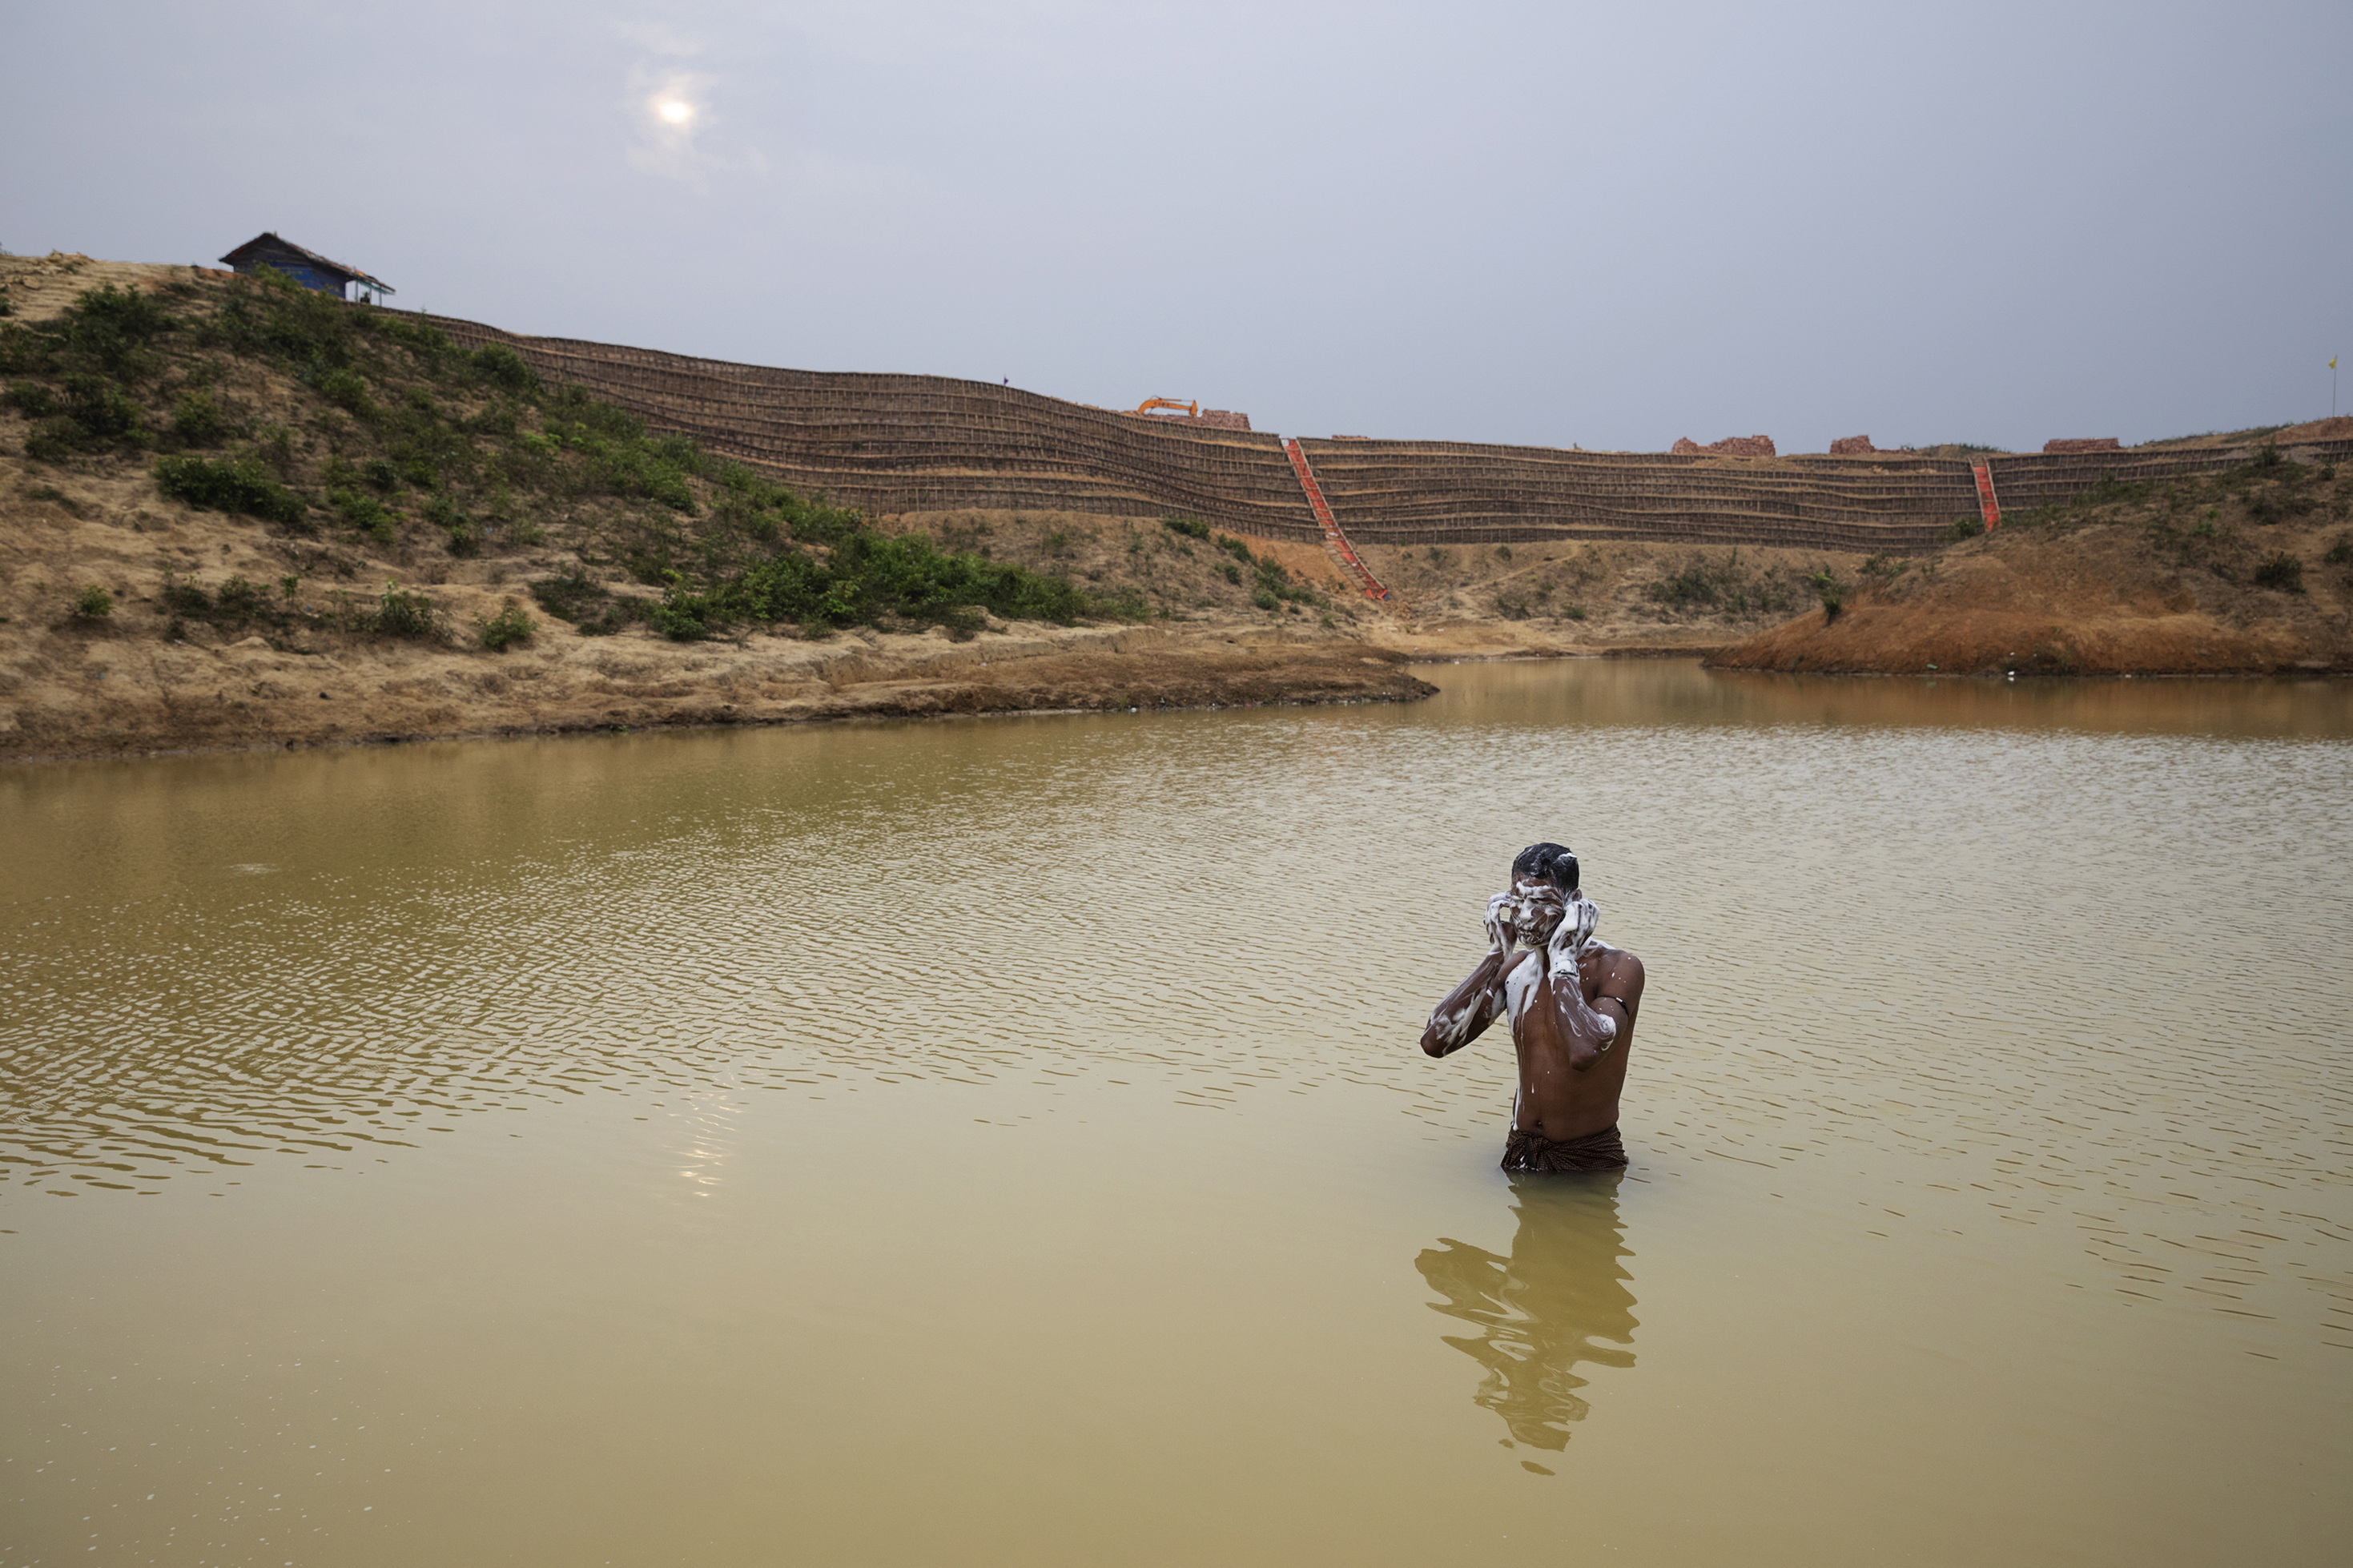 A man bathes in a man-made pond near the camp where he lives. Behind him is the construction of the Camp 20 Extension. (James Nachtwey for TIME)